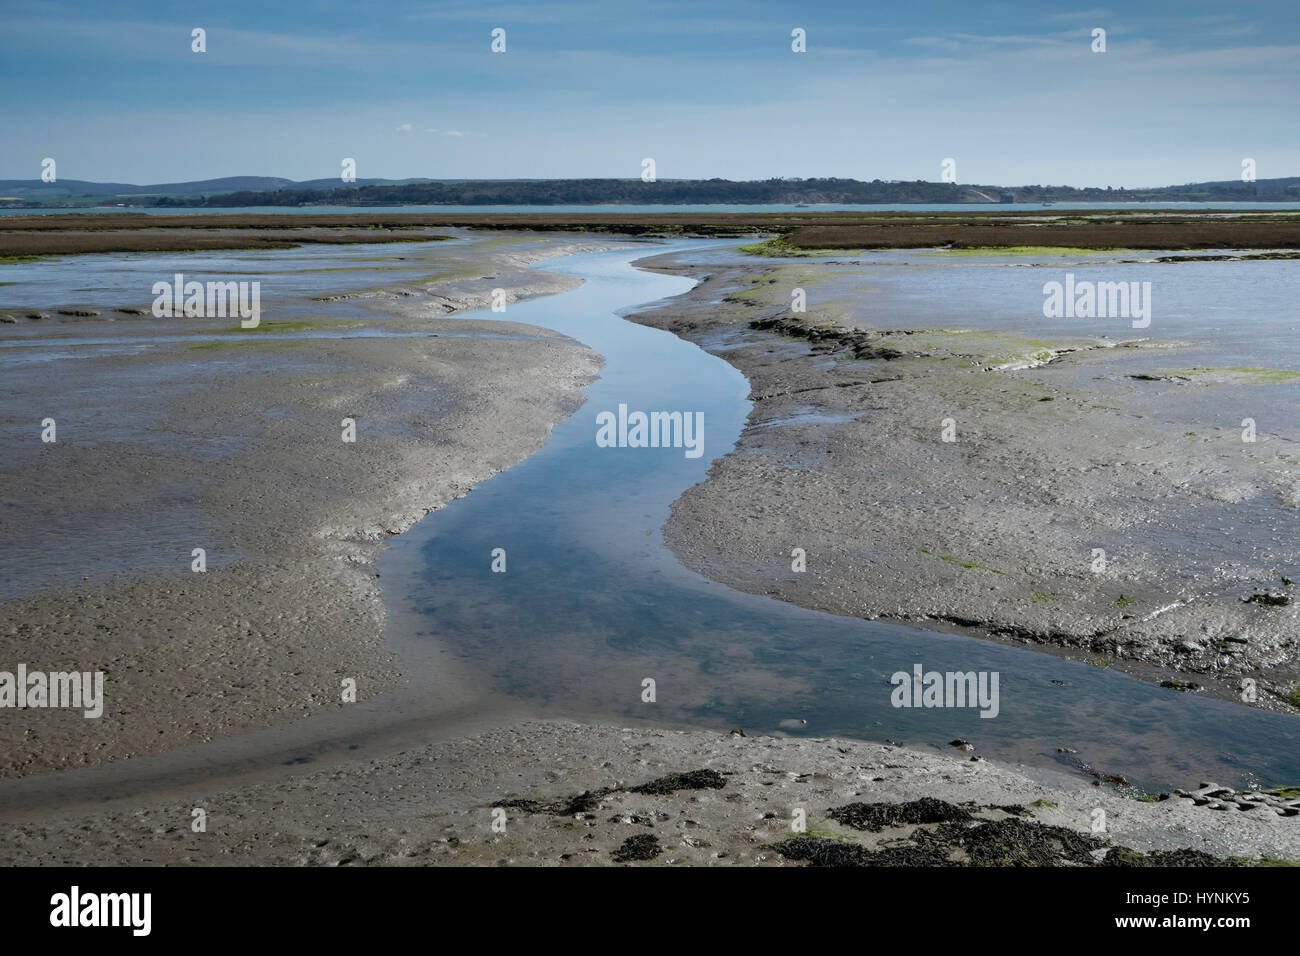 A scenic water channel in the mudflats at Keyhaven Harbour with the tide out, leading to the Solent and Isle of Wight. Stock Photo